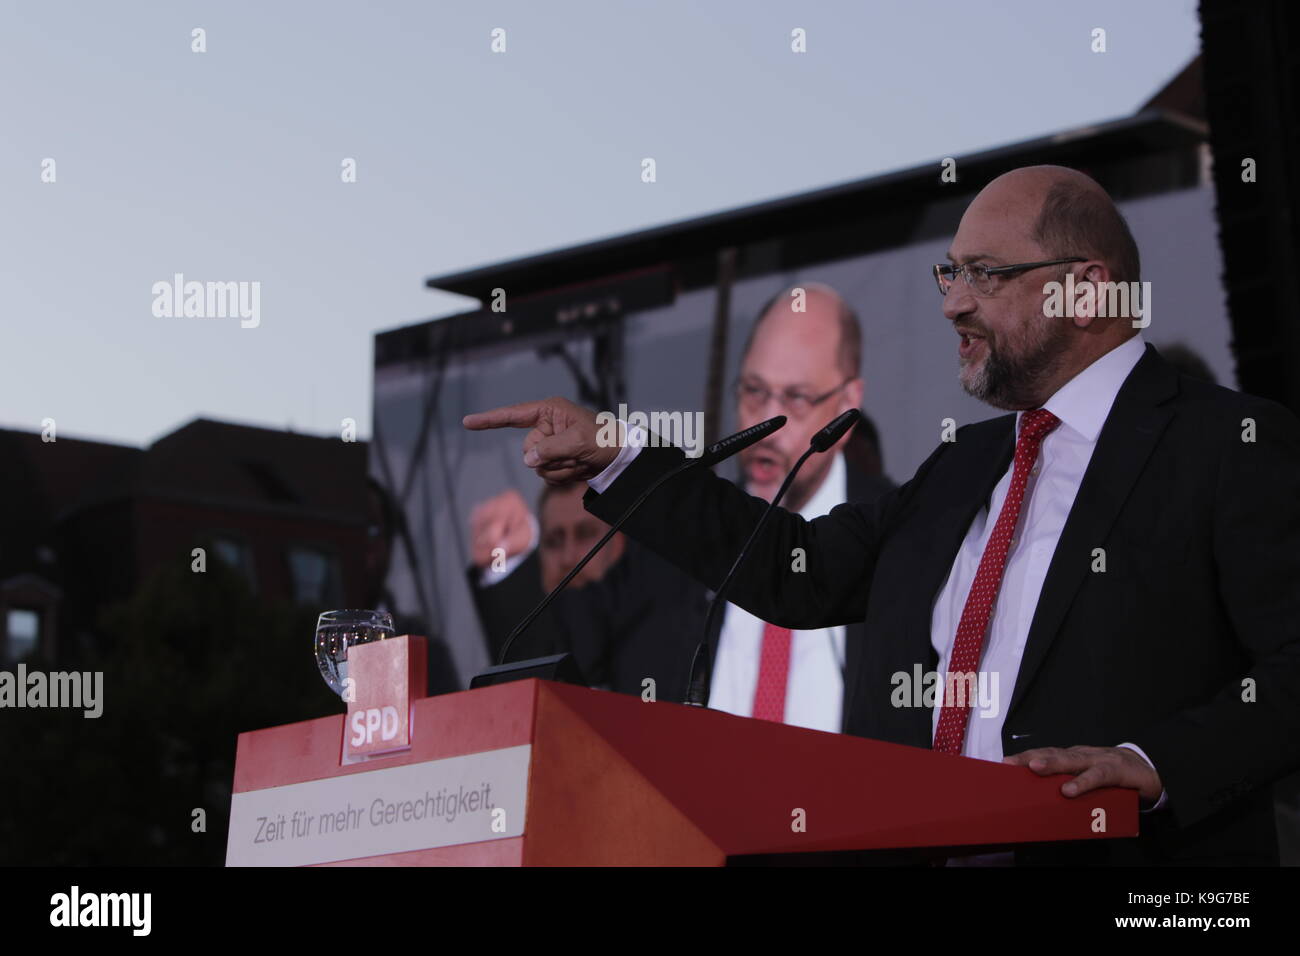 Berlin, Germany. 22nd Sep, 2017. Martin Schulz addresses the rally. The candidate for the German Chancellorship of the SPD (Social Democratic Party of Germany) was the main speaker at a large rally in the centre of Berlin, two days ahead of the German General Election. Credit: Michael Debets/Pacific Press/Alamy Live News Stock Photo